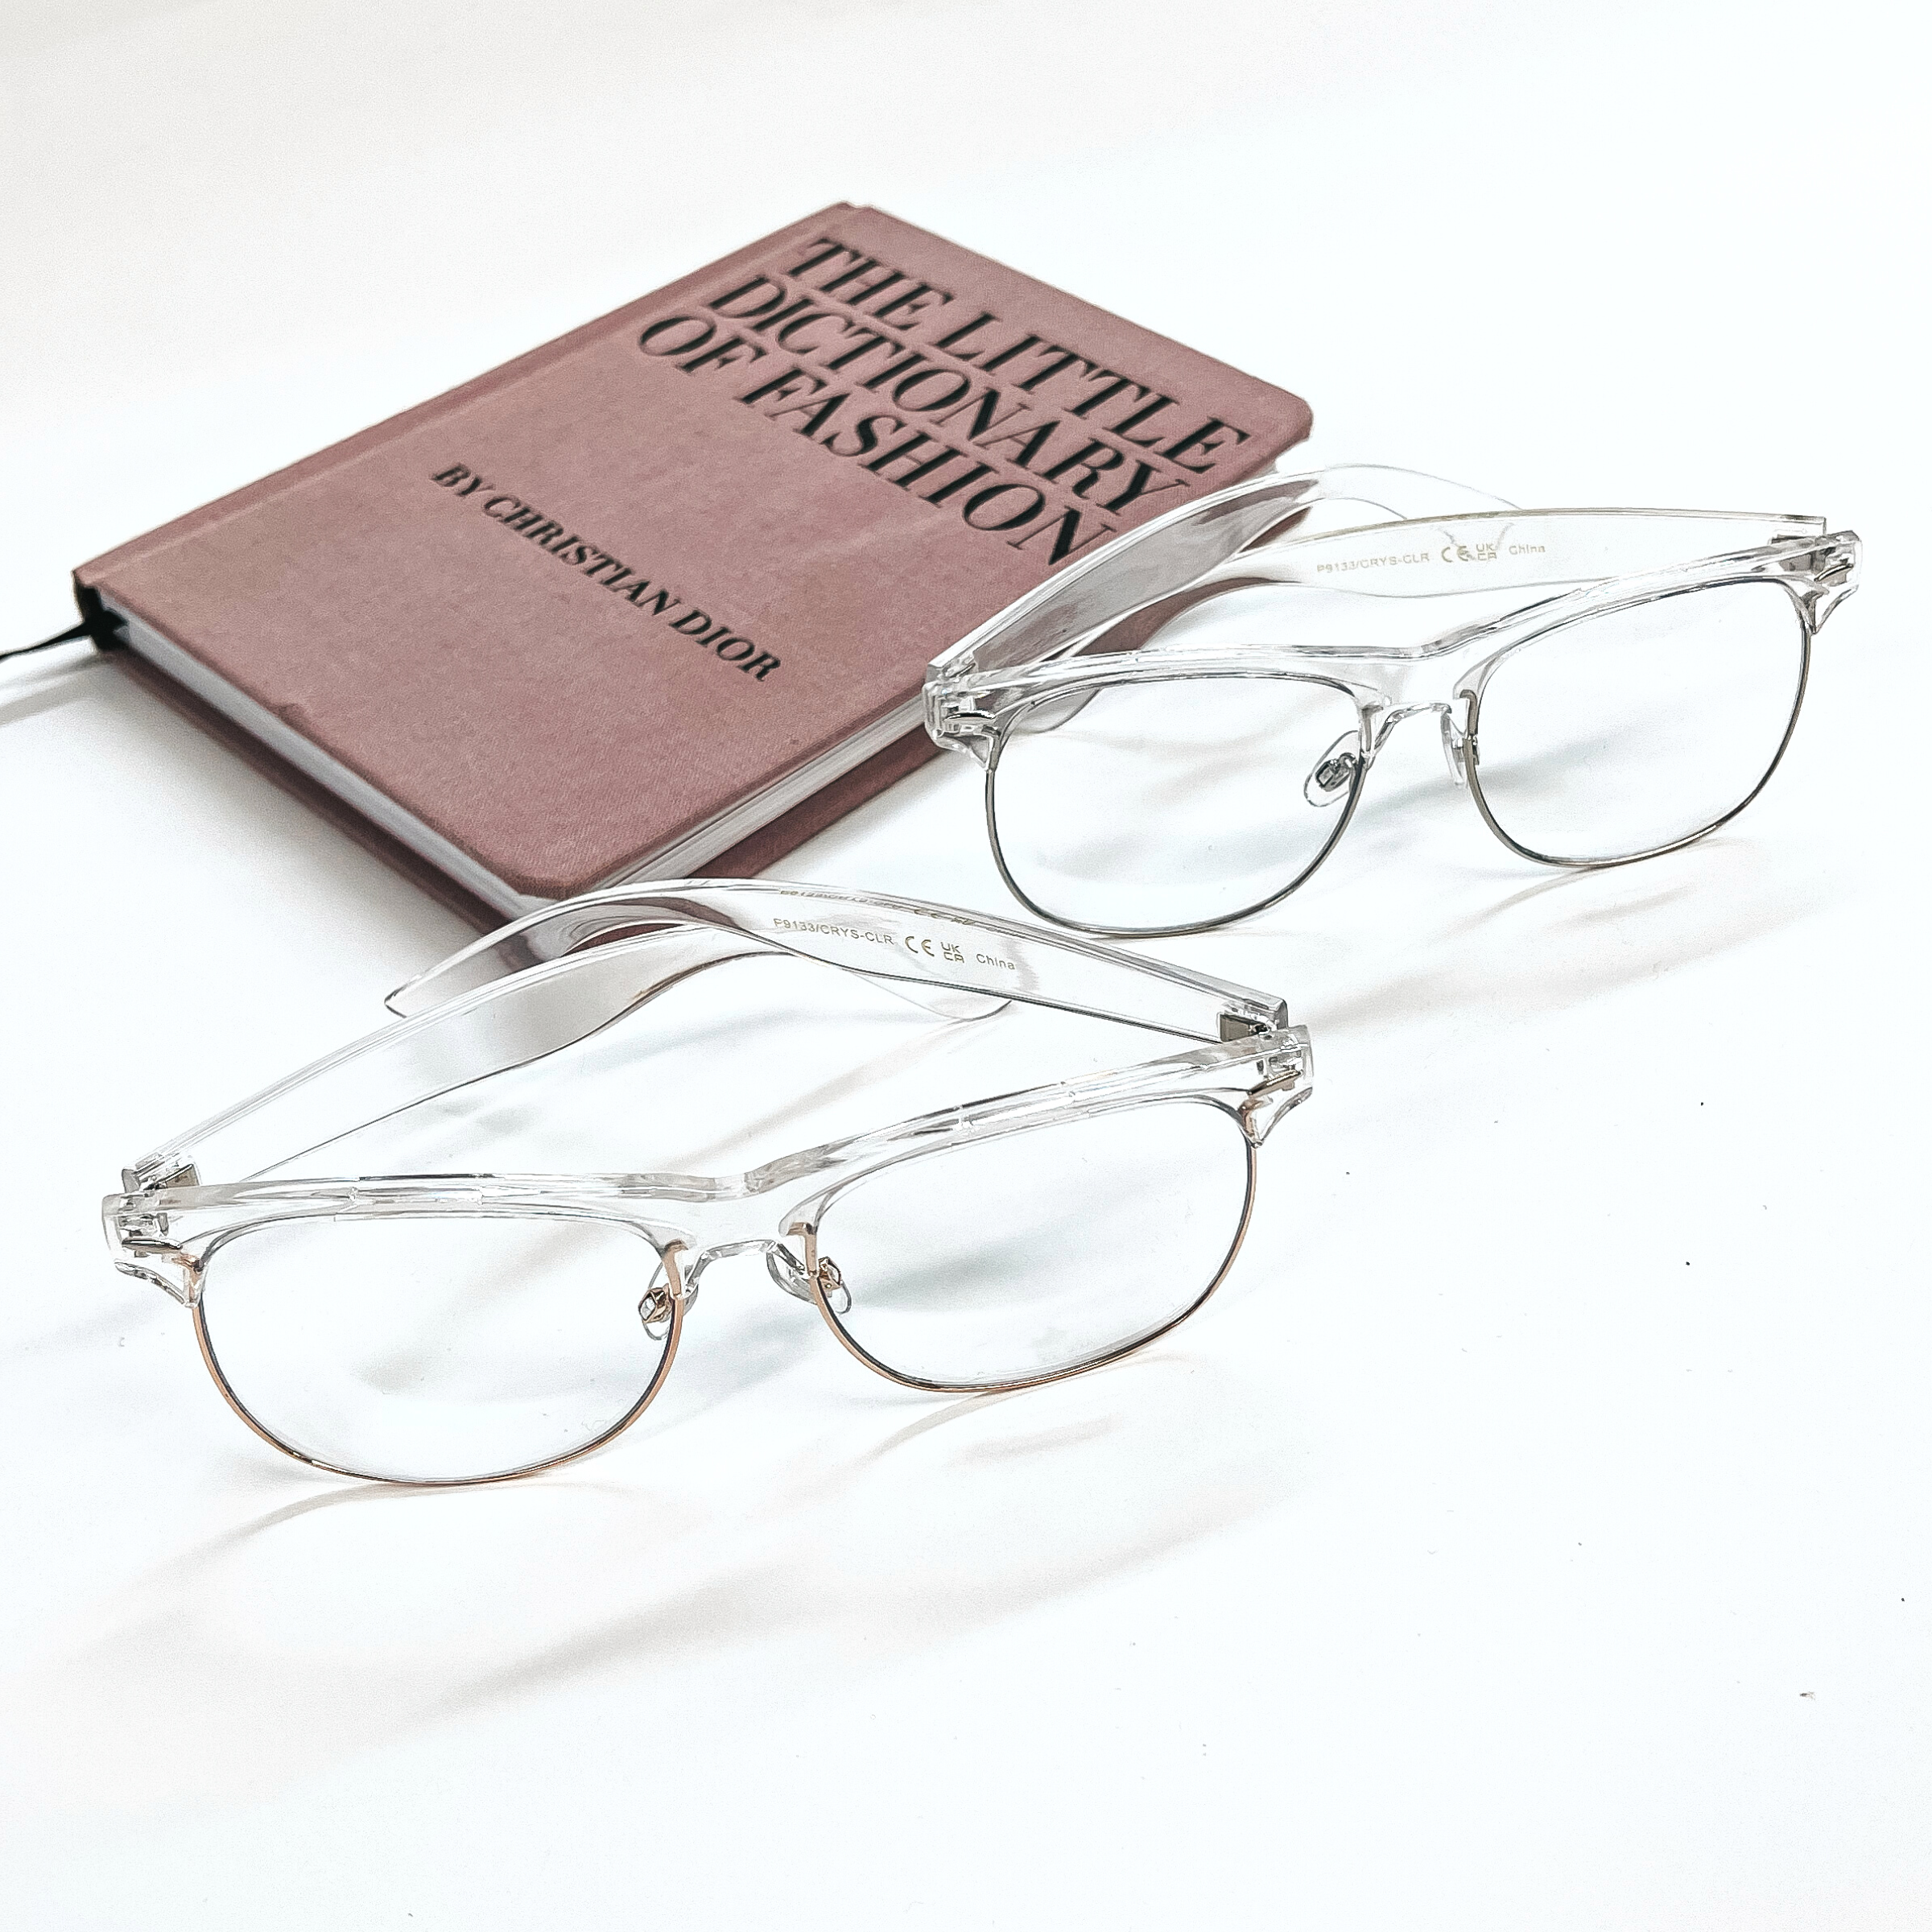 These are two pairs of clear glasses, both clear lenses and clear frames. The frames in front have a rose gold outline and the ones in the back have a silver outline. Both of these glasses are taken on a white background with a pink/purple fashion book in the back as decor.